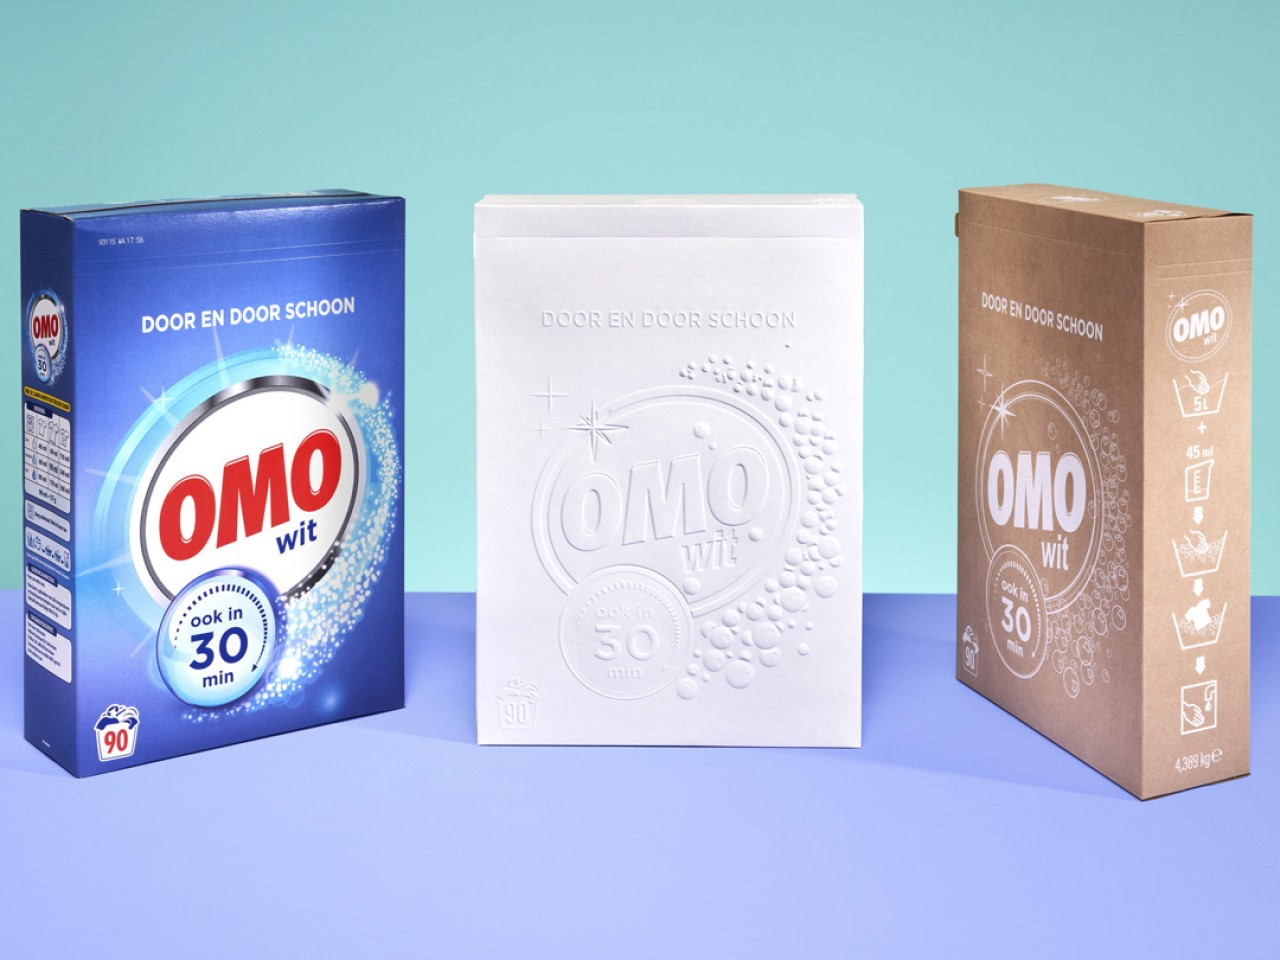 White is the new green - Reducing materials to design eco-friendly and sustainable laundry packaging.